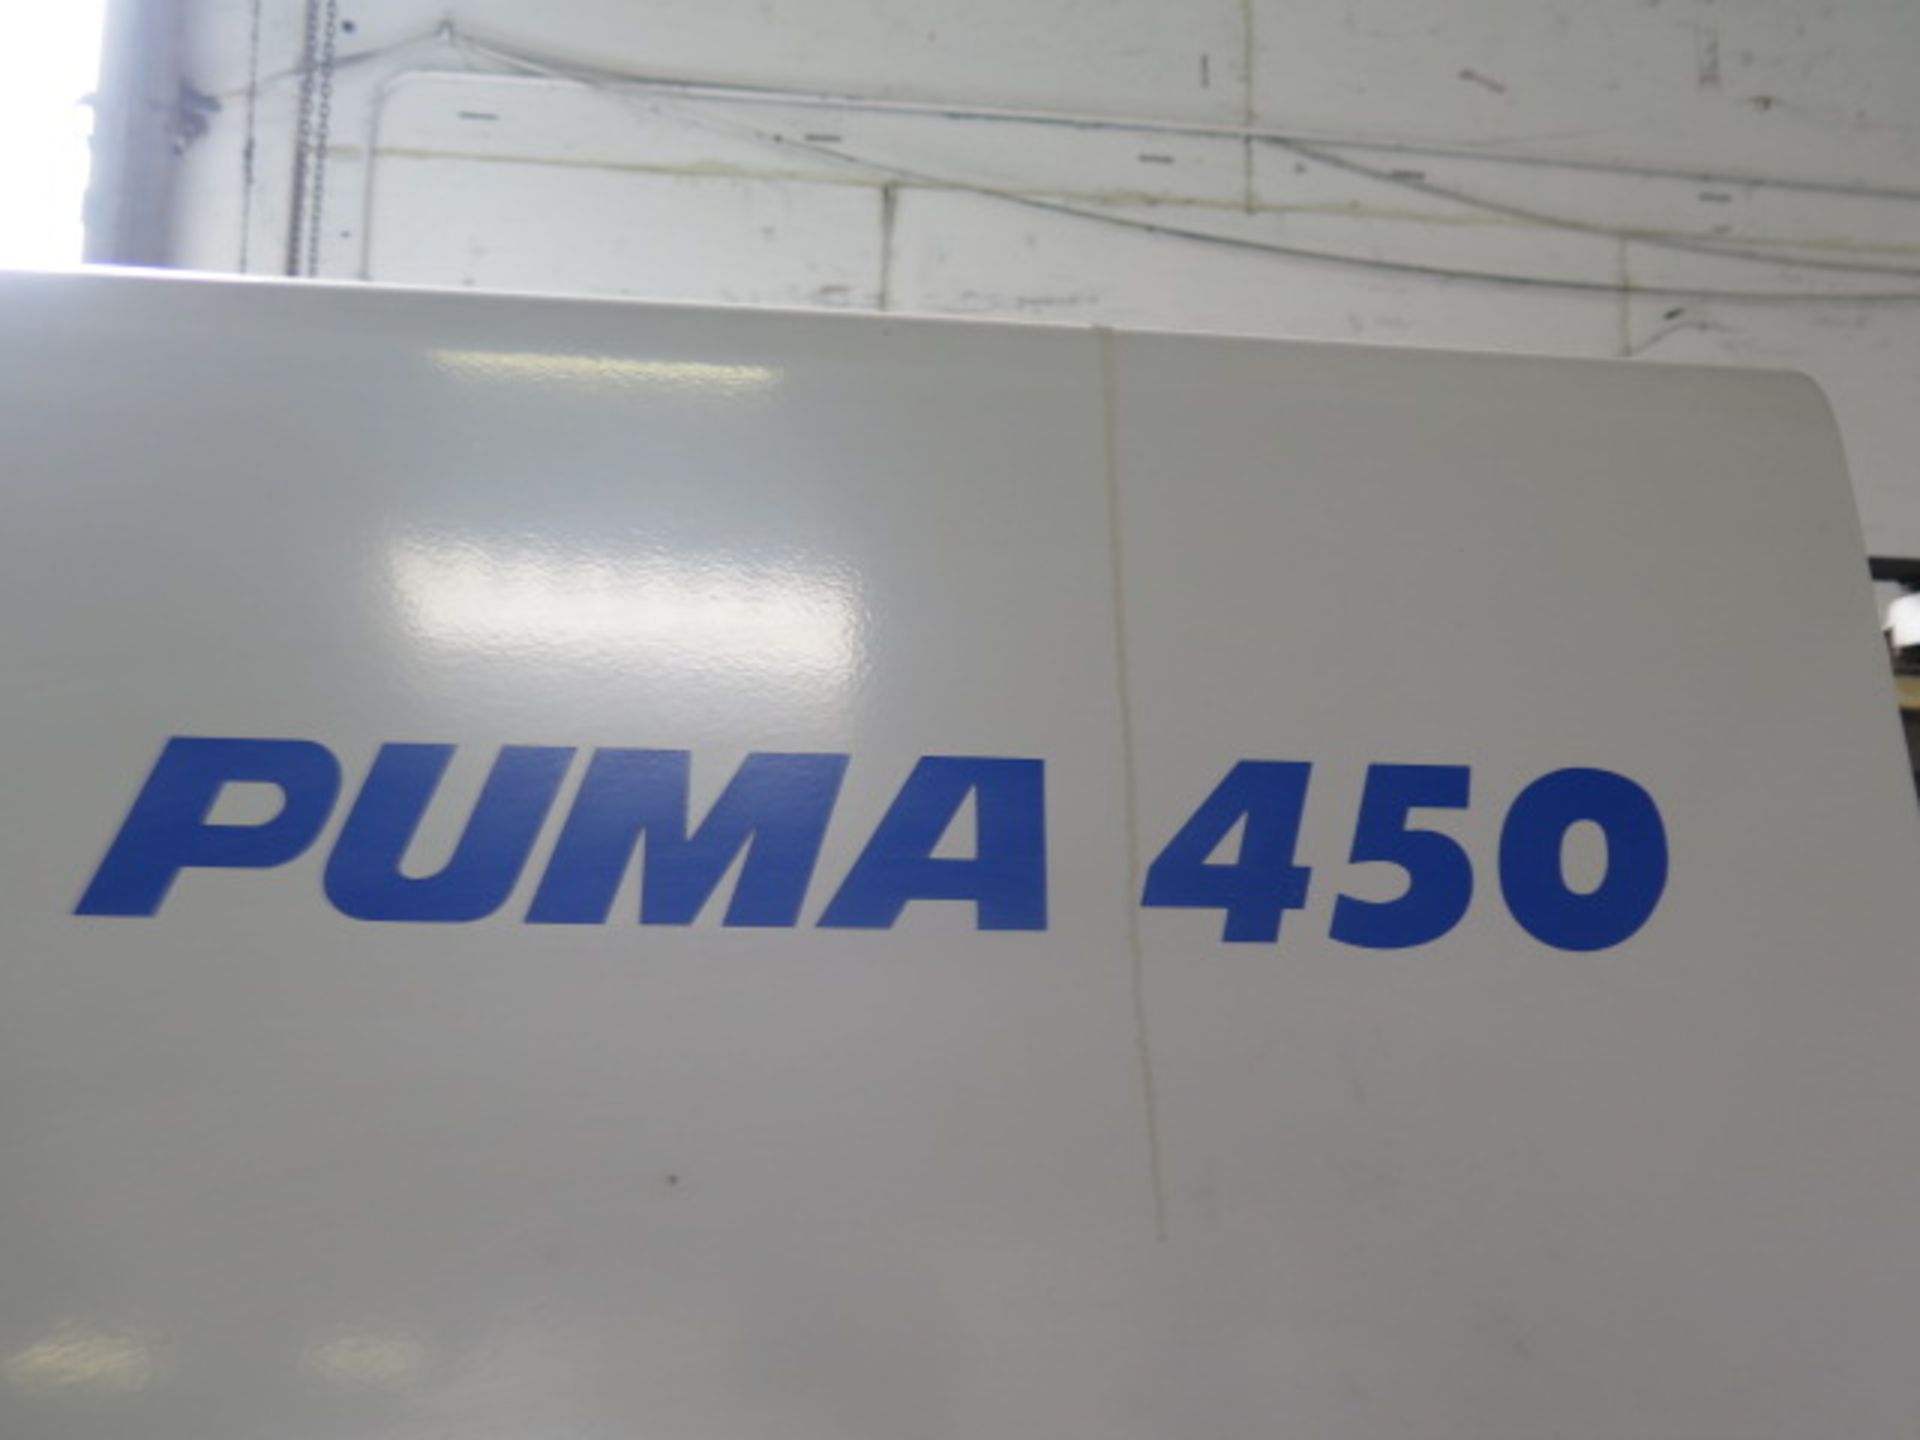 1998 Daewoo PUMA 450A CNC Turning Center s/n PM450114 w/ Fanuc 0-T Controls, 12-Station, SOLD AS IS - Image 12 of 15